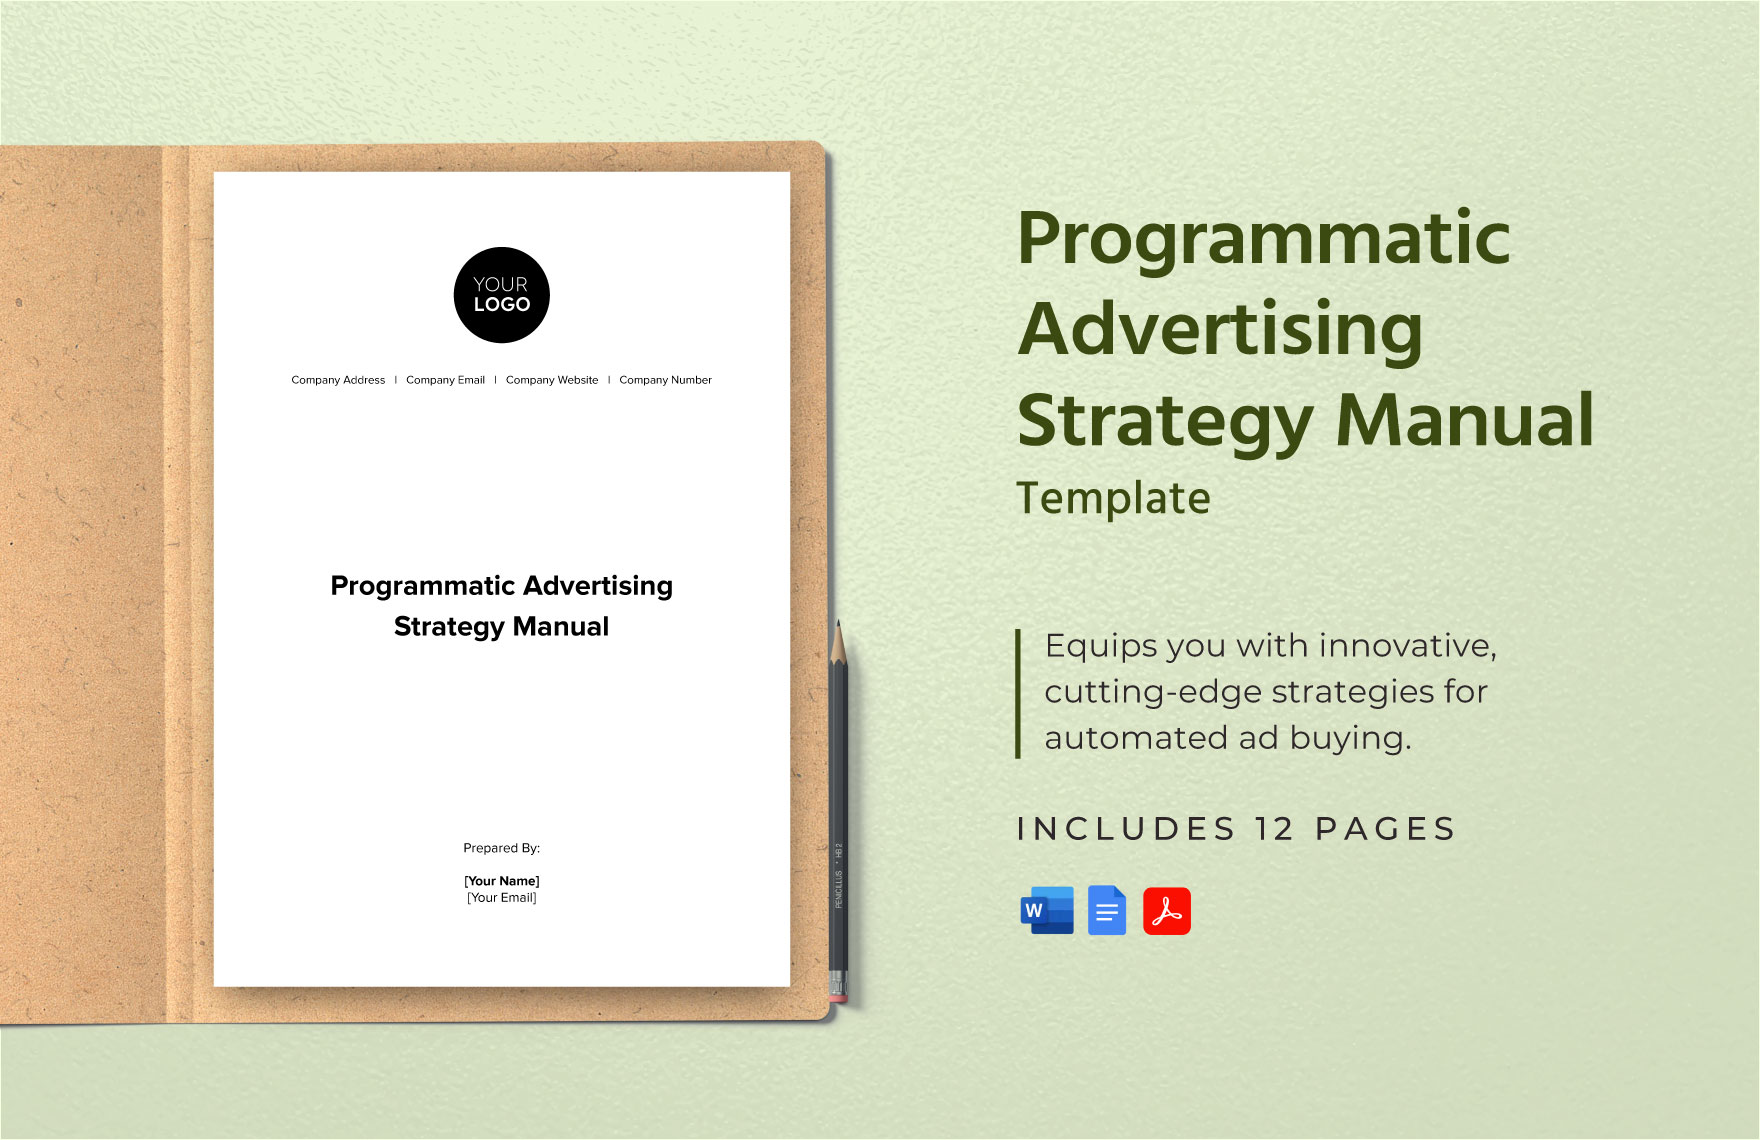 Programmatic Advertising Strategy Manual Template in Word, Google Docs, PDF